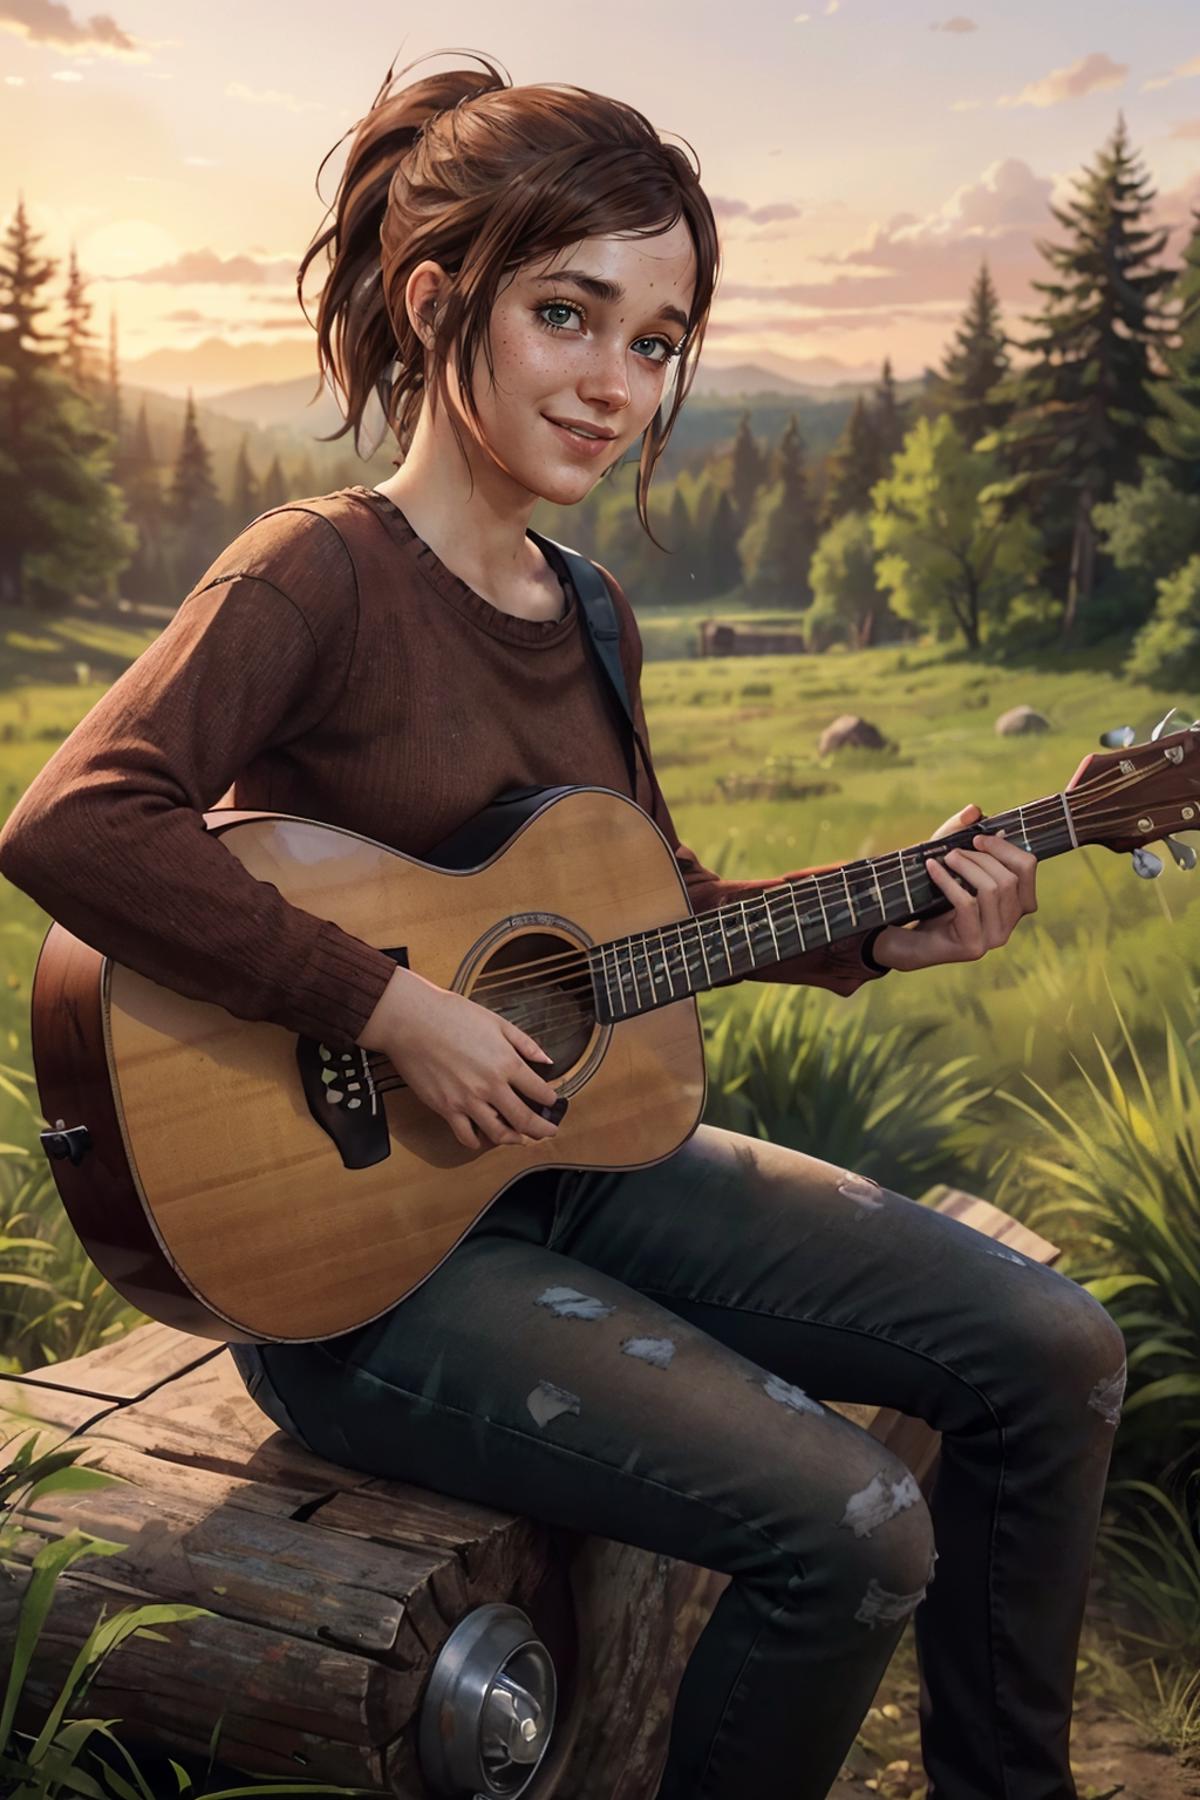 Ellie from The Last of Us image by wikkitikki